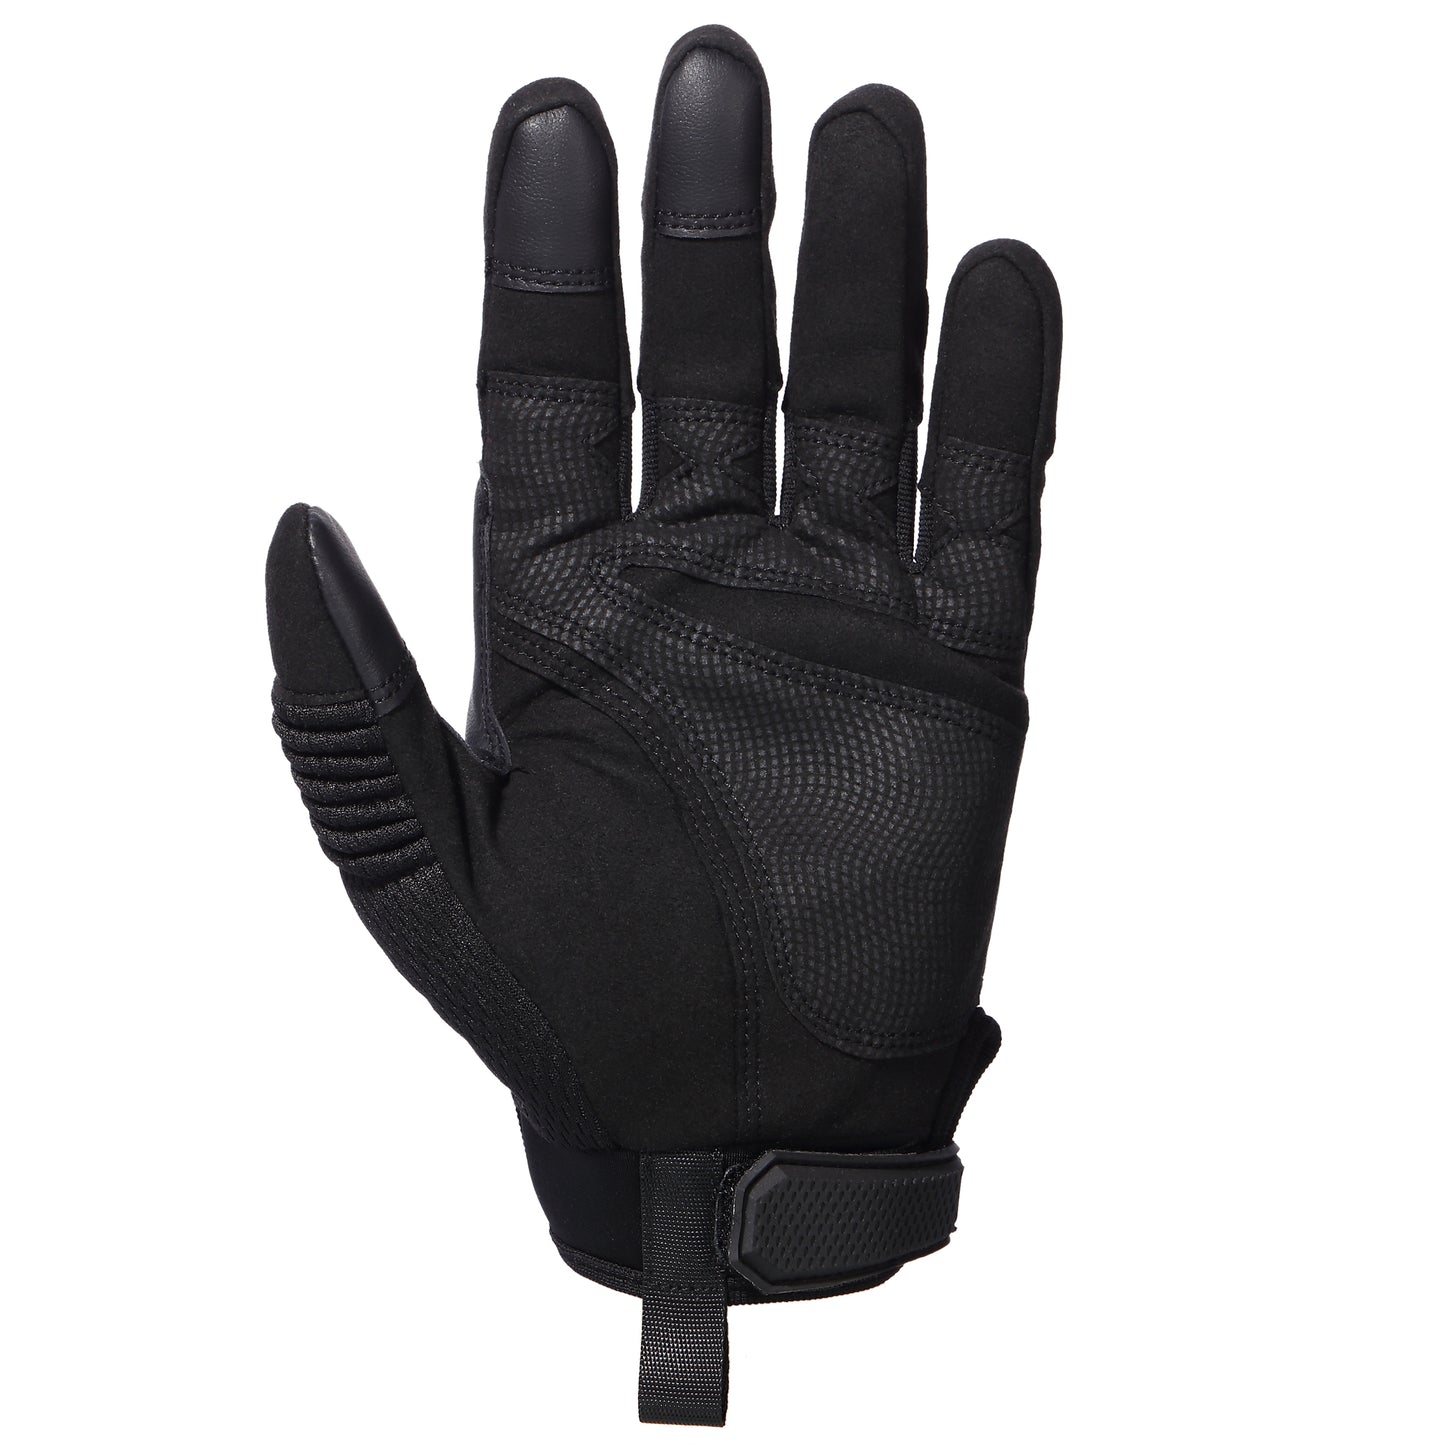 MotoGrip™ - Motorcycle Gloves